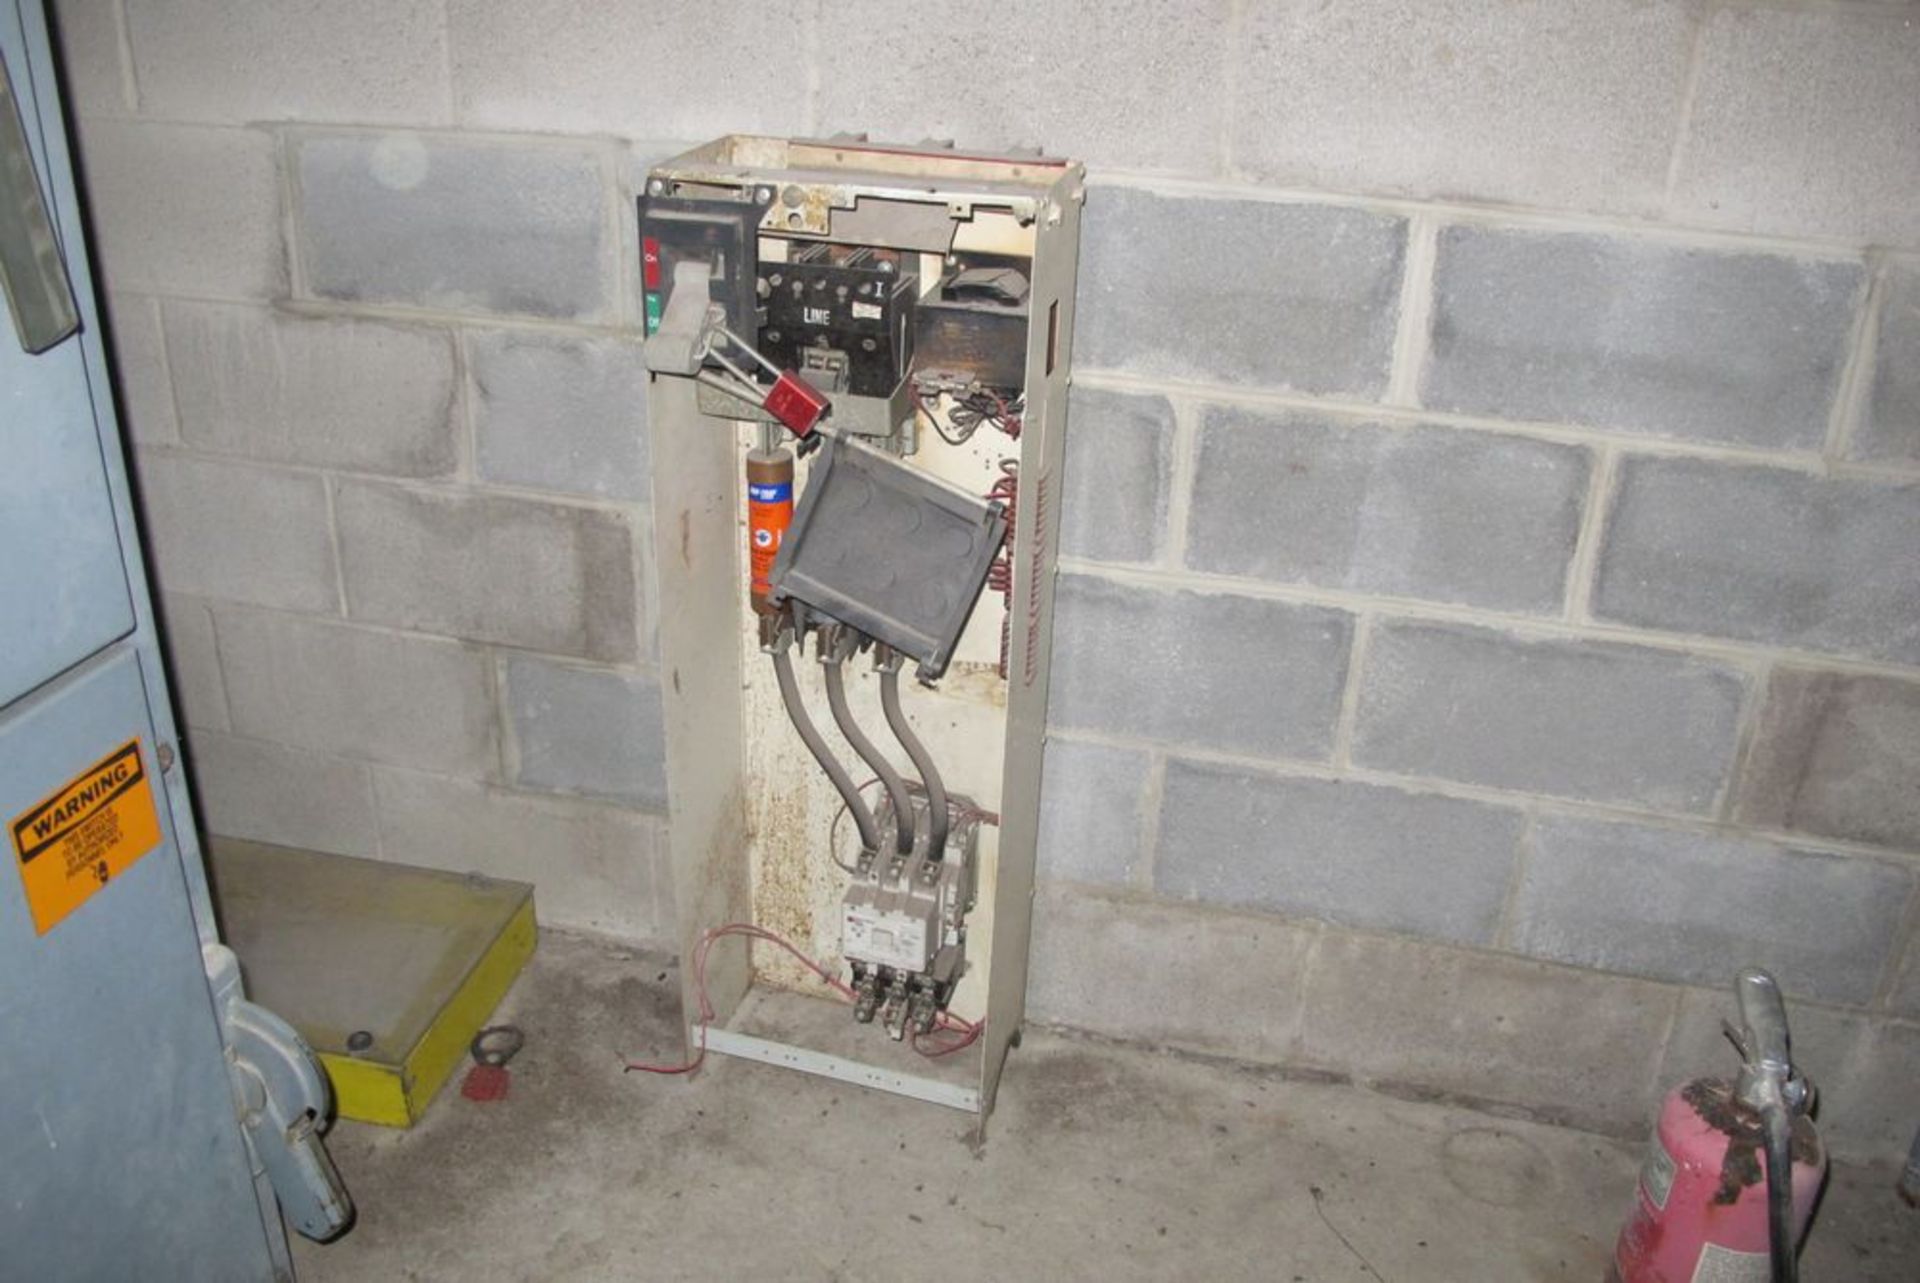 WESTINGHOUSE FIVE STAR MCC #1, CUT WIRES 6" FROM PANEL (WOOD YARD - SUBSTATION) - Image 3 of 4